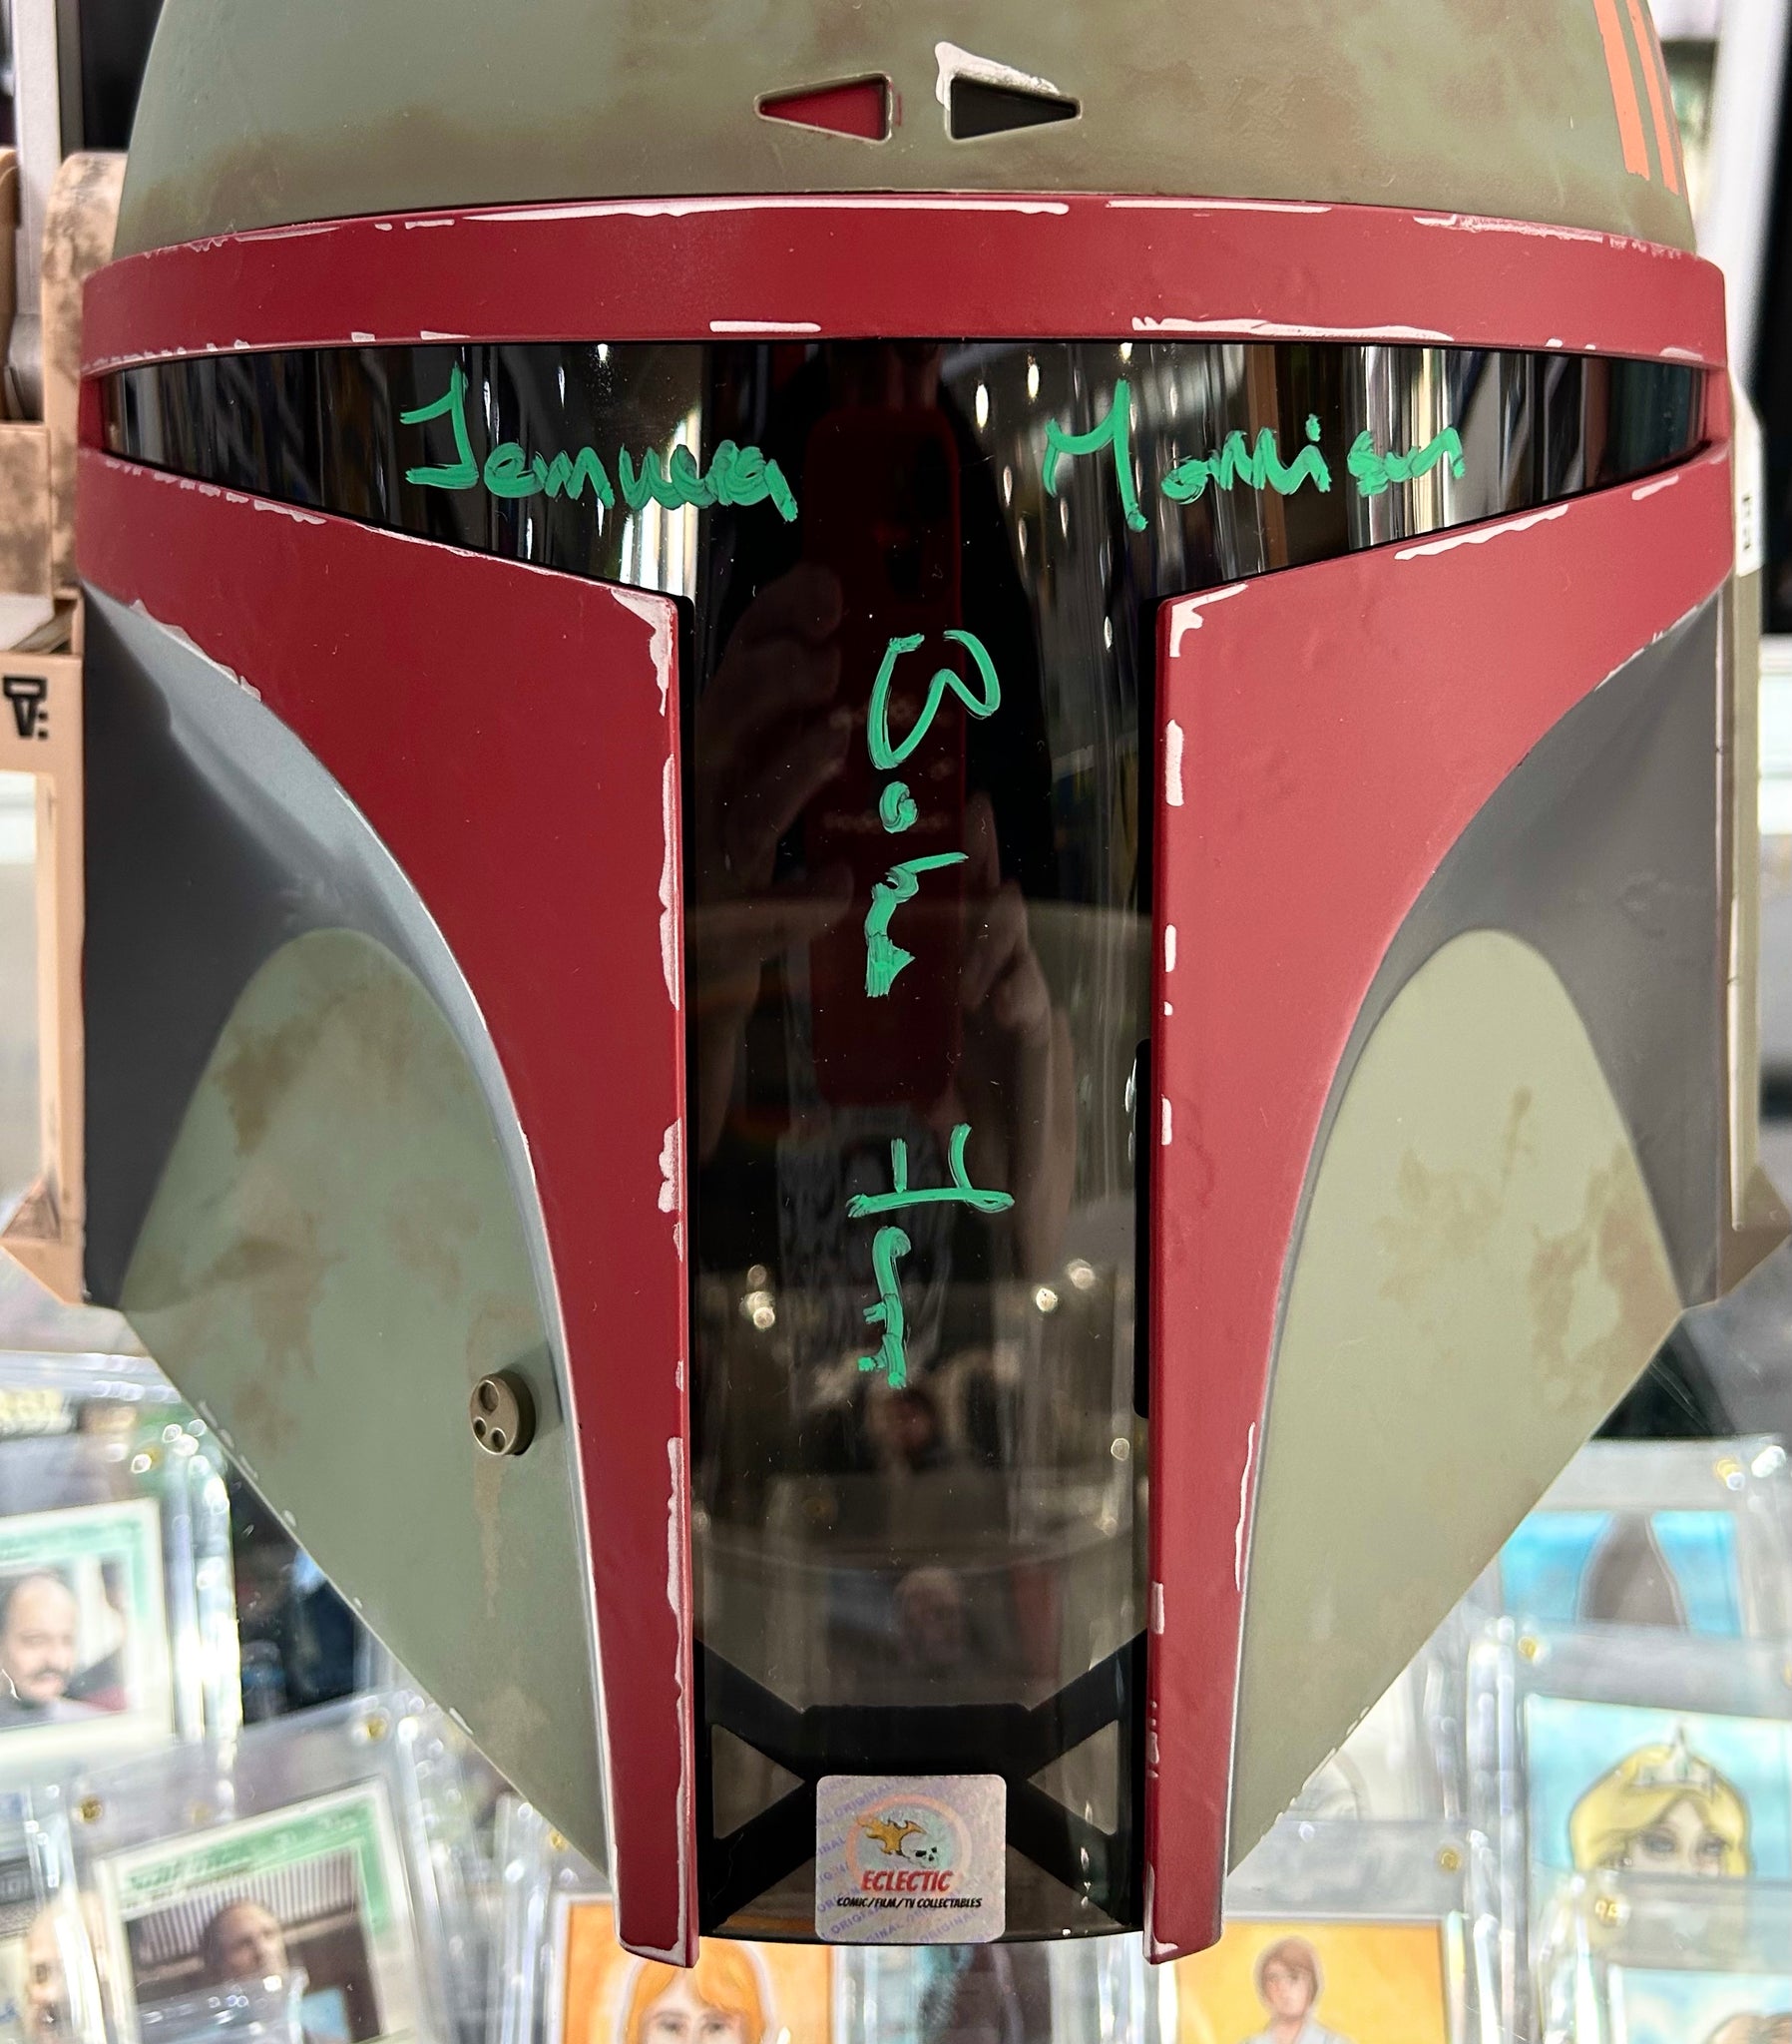 Star Wars The Black Series Boba Fett Re-Armored Temuera Morrison Autographed Electronic Helmet with Triple Layer Authenticity